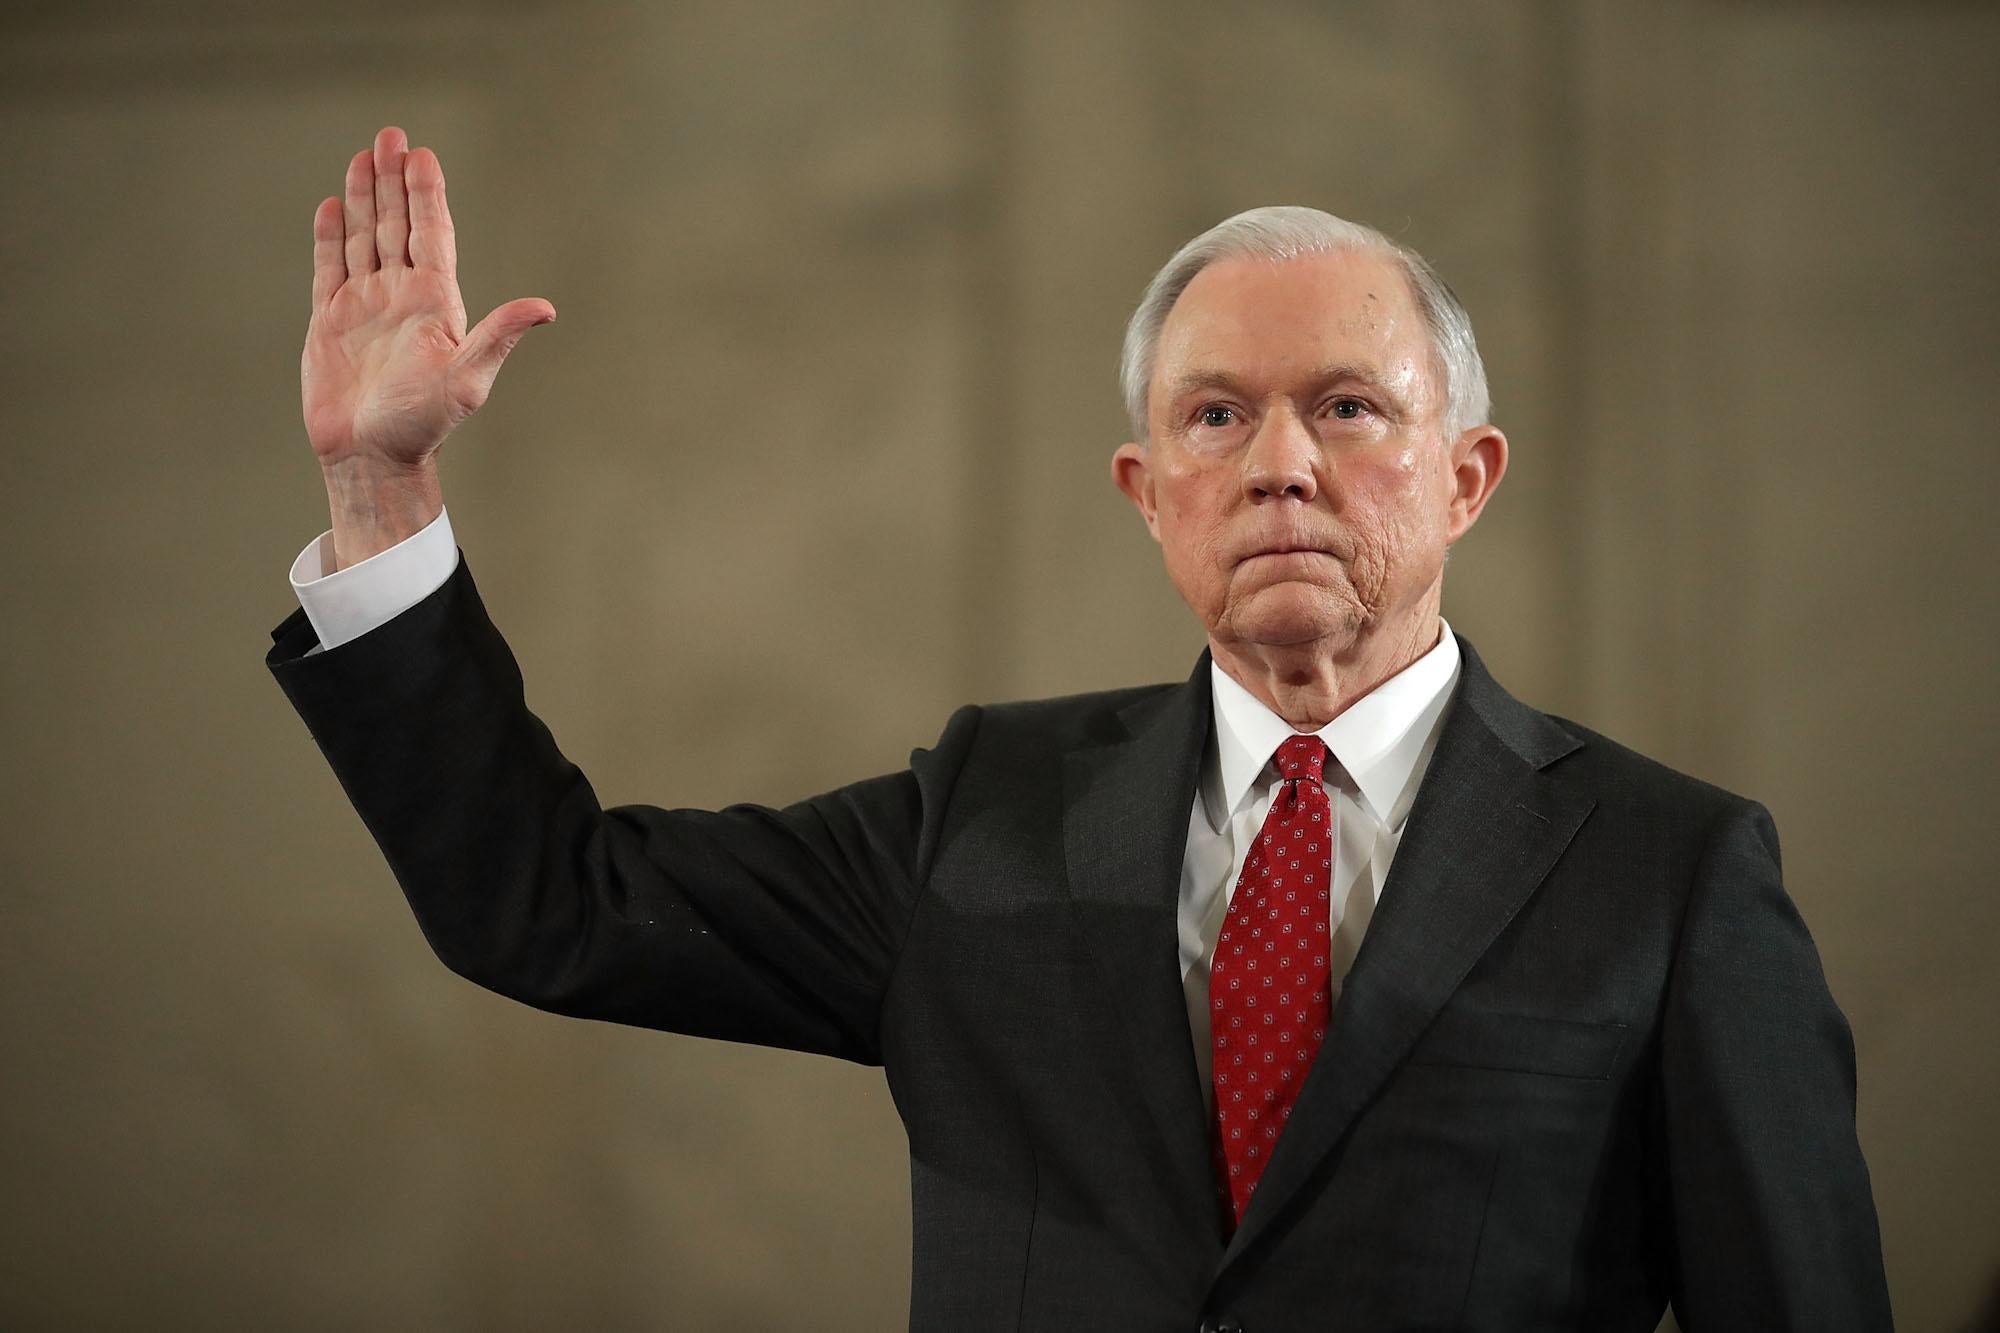 Senator Jeff Sessions defended himself against accusations of racism at a Senate confirmation hearing